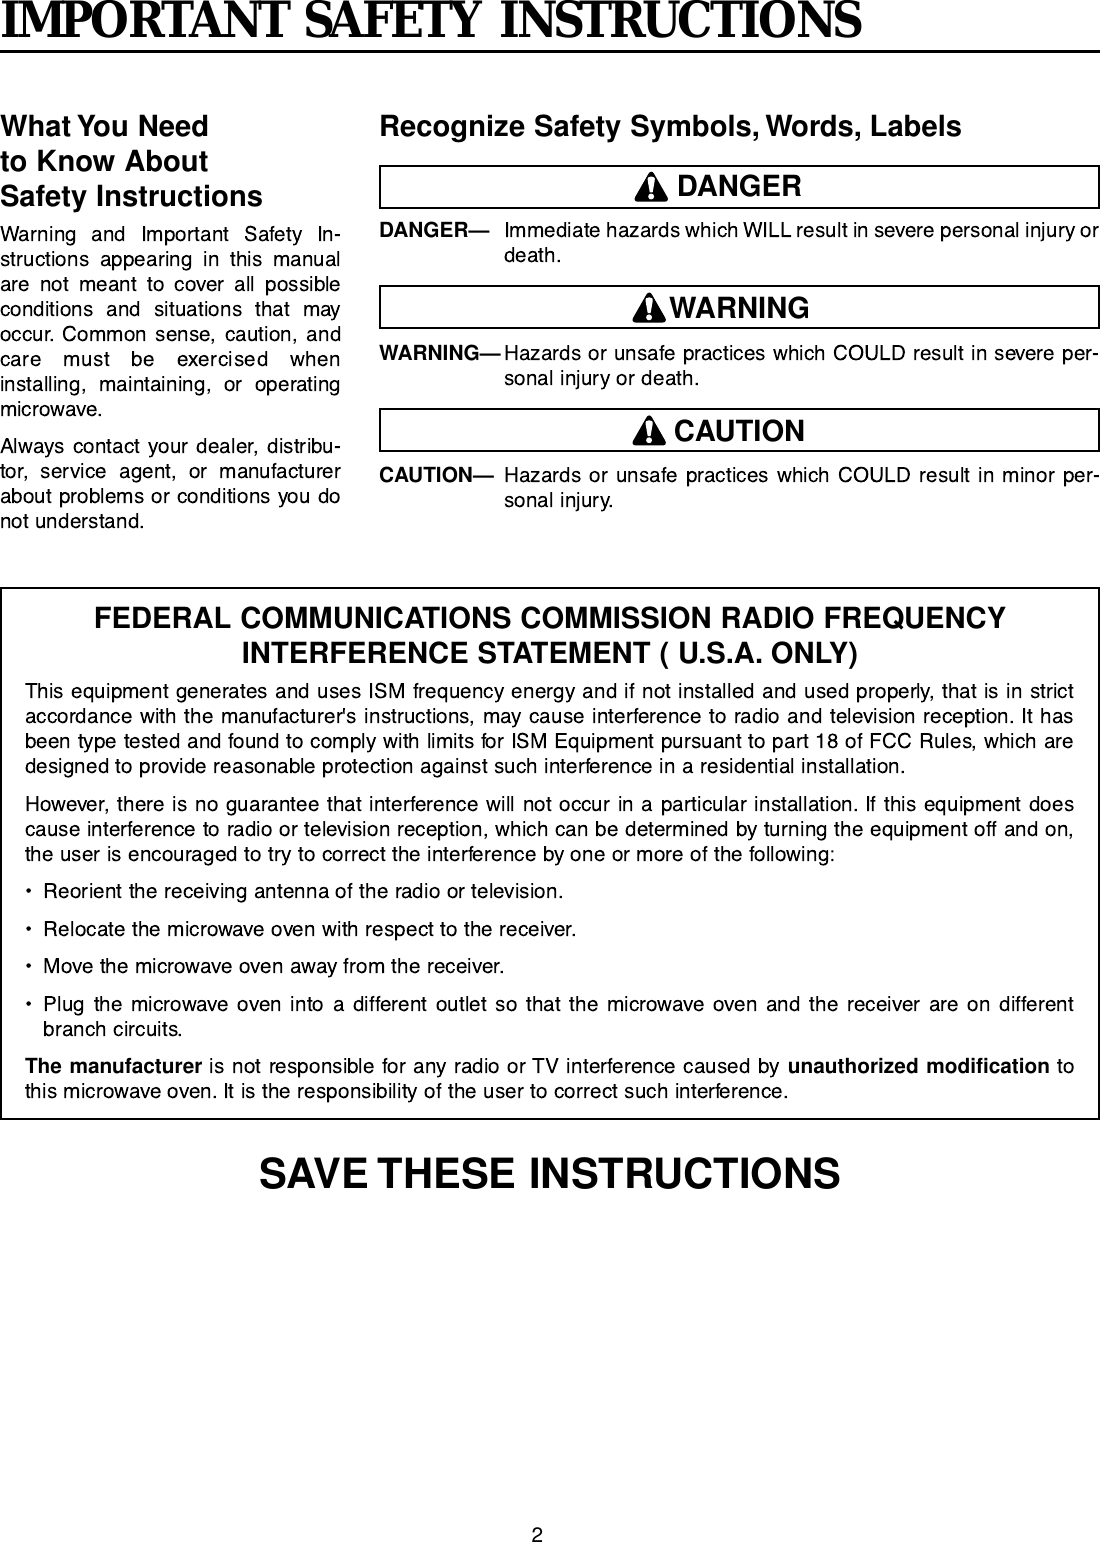 2IMPORTANT SAFETY INSTRUCTIONSWhat You Need to Know About Safety InstructionsRecognize Safety Symbols, Words, LabelsDANGERDANGER—WARNINGWARNING—CAUTIONCAUTION—SAVE THESE INSTRUCTIONSFEDERAL COMMUNICATIONS COMMISSION RADIO FREQUENCY INTERFERENCE STATEMENT ( U.S.A. ONLY)The manufacturer unauthorized modification